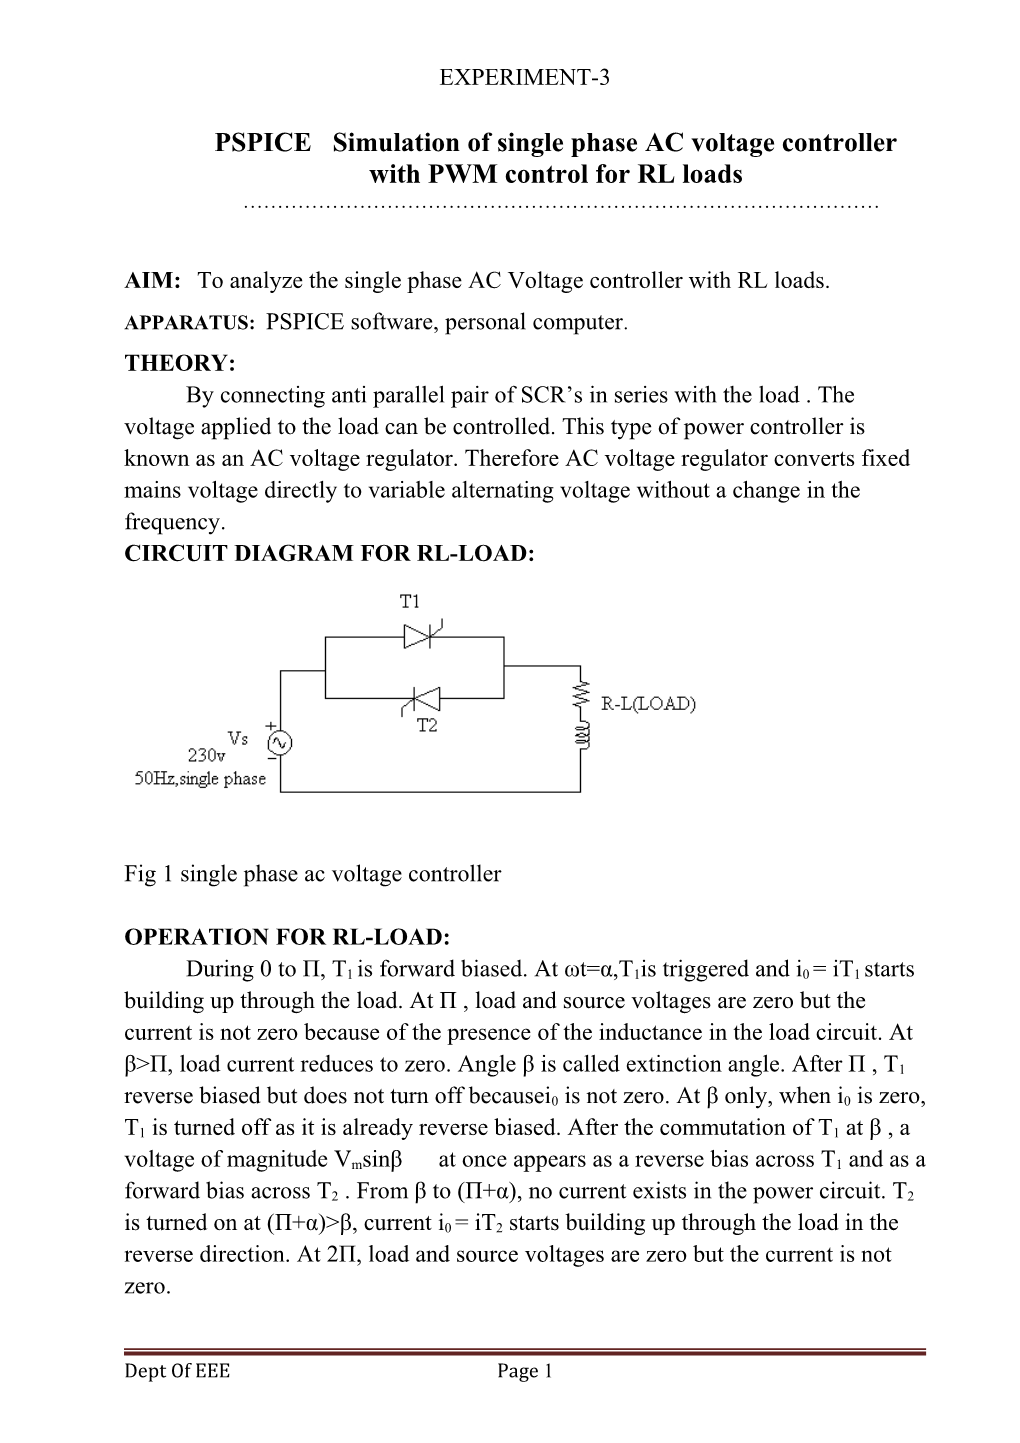 PSPICE Simulation of Single Phase AC Voltage Controller with PWM Controlfor RL Loads